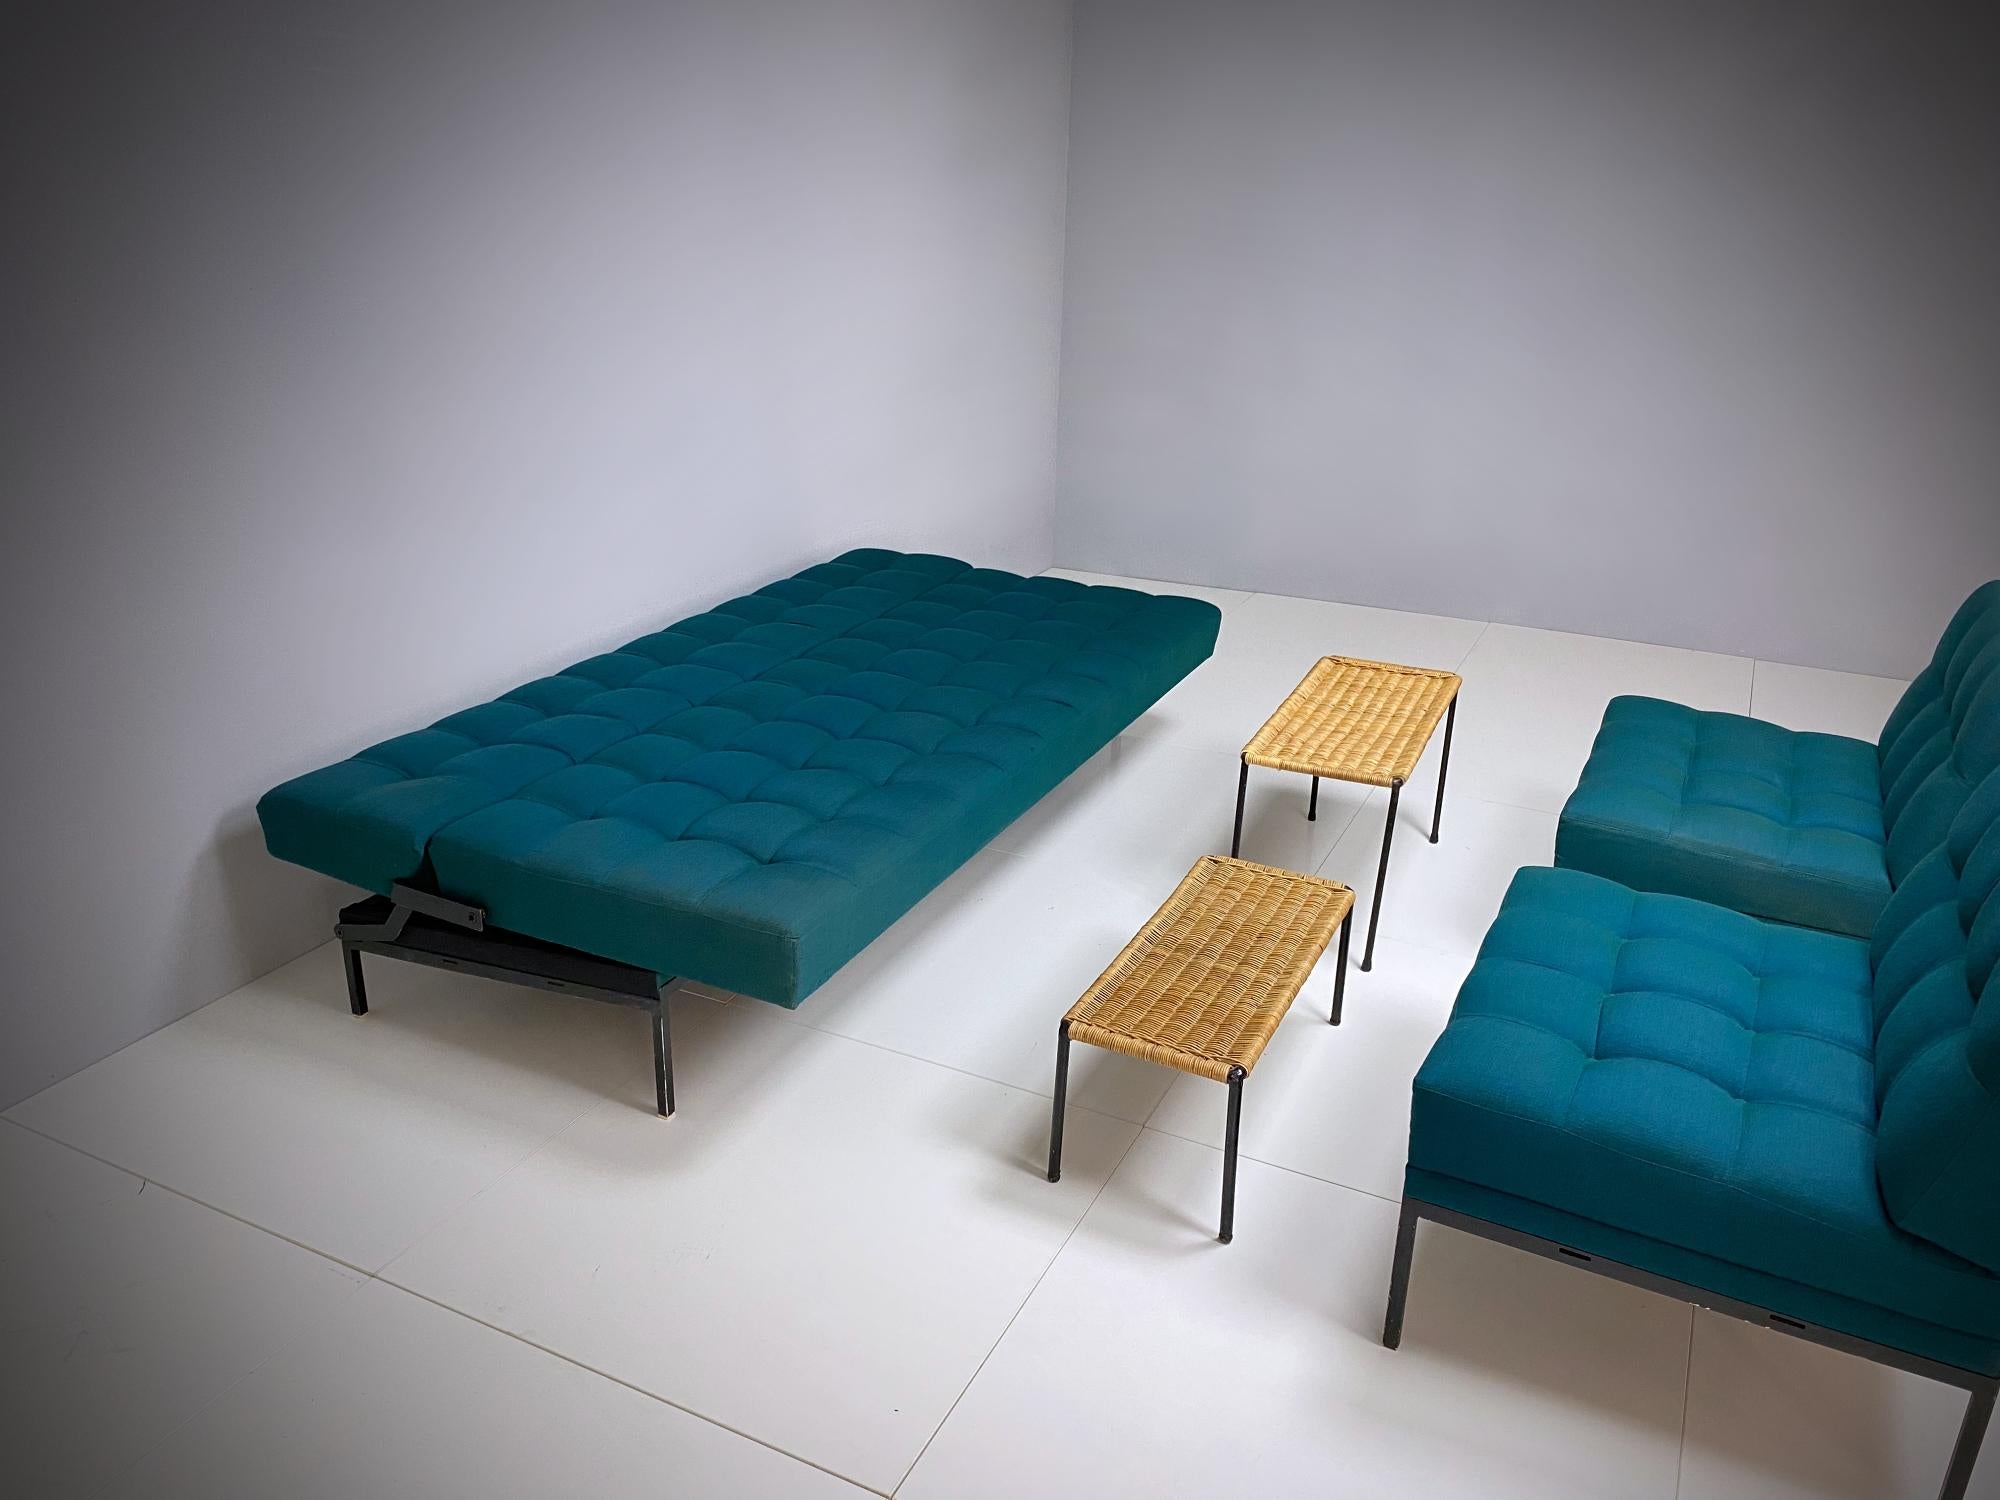 Wittmann Constanze Tufted Midcentury Sofa & Chairs by J. Spalt, 1970s, Austria For Sale 4